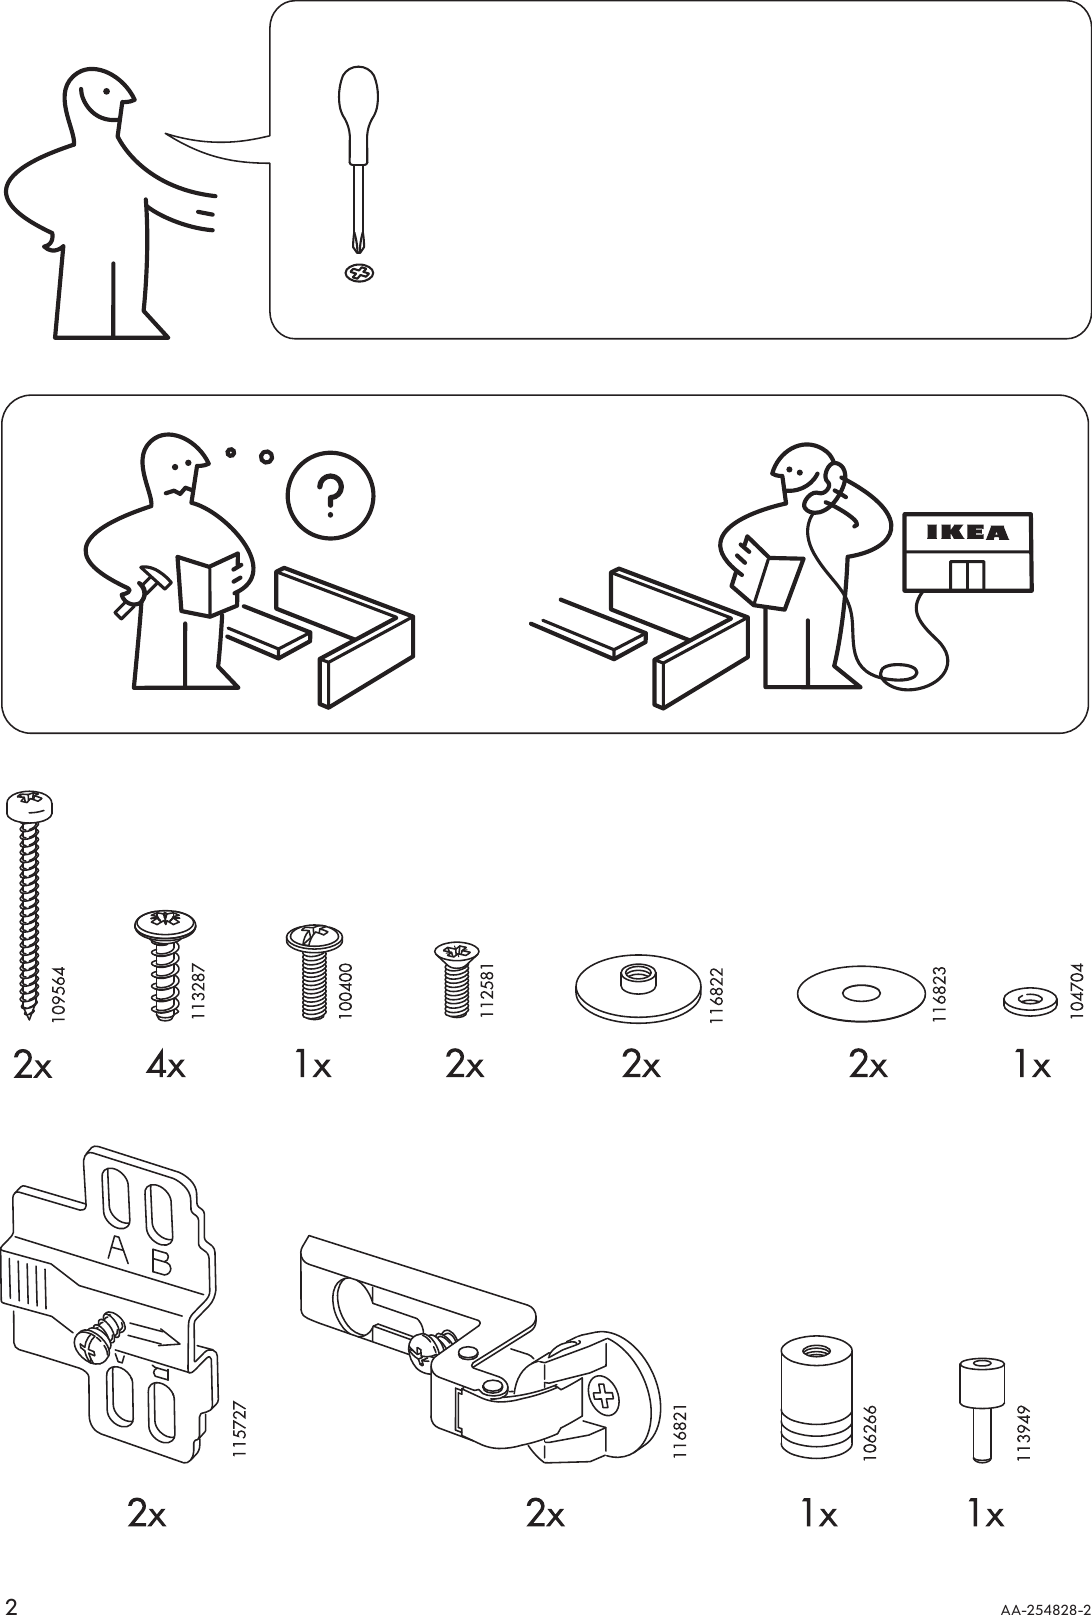 Page 2 of 8 - Ikea Ikea-Traby-Glass-Door-13-3-4X13-3-4-Assembly-Instruction